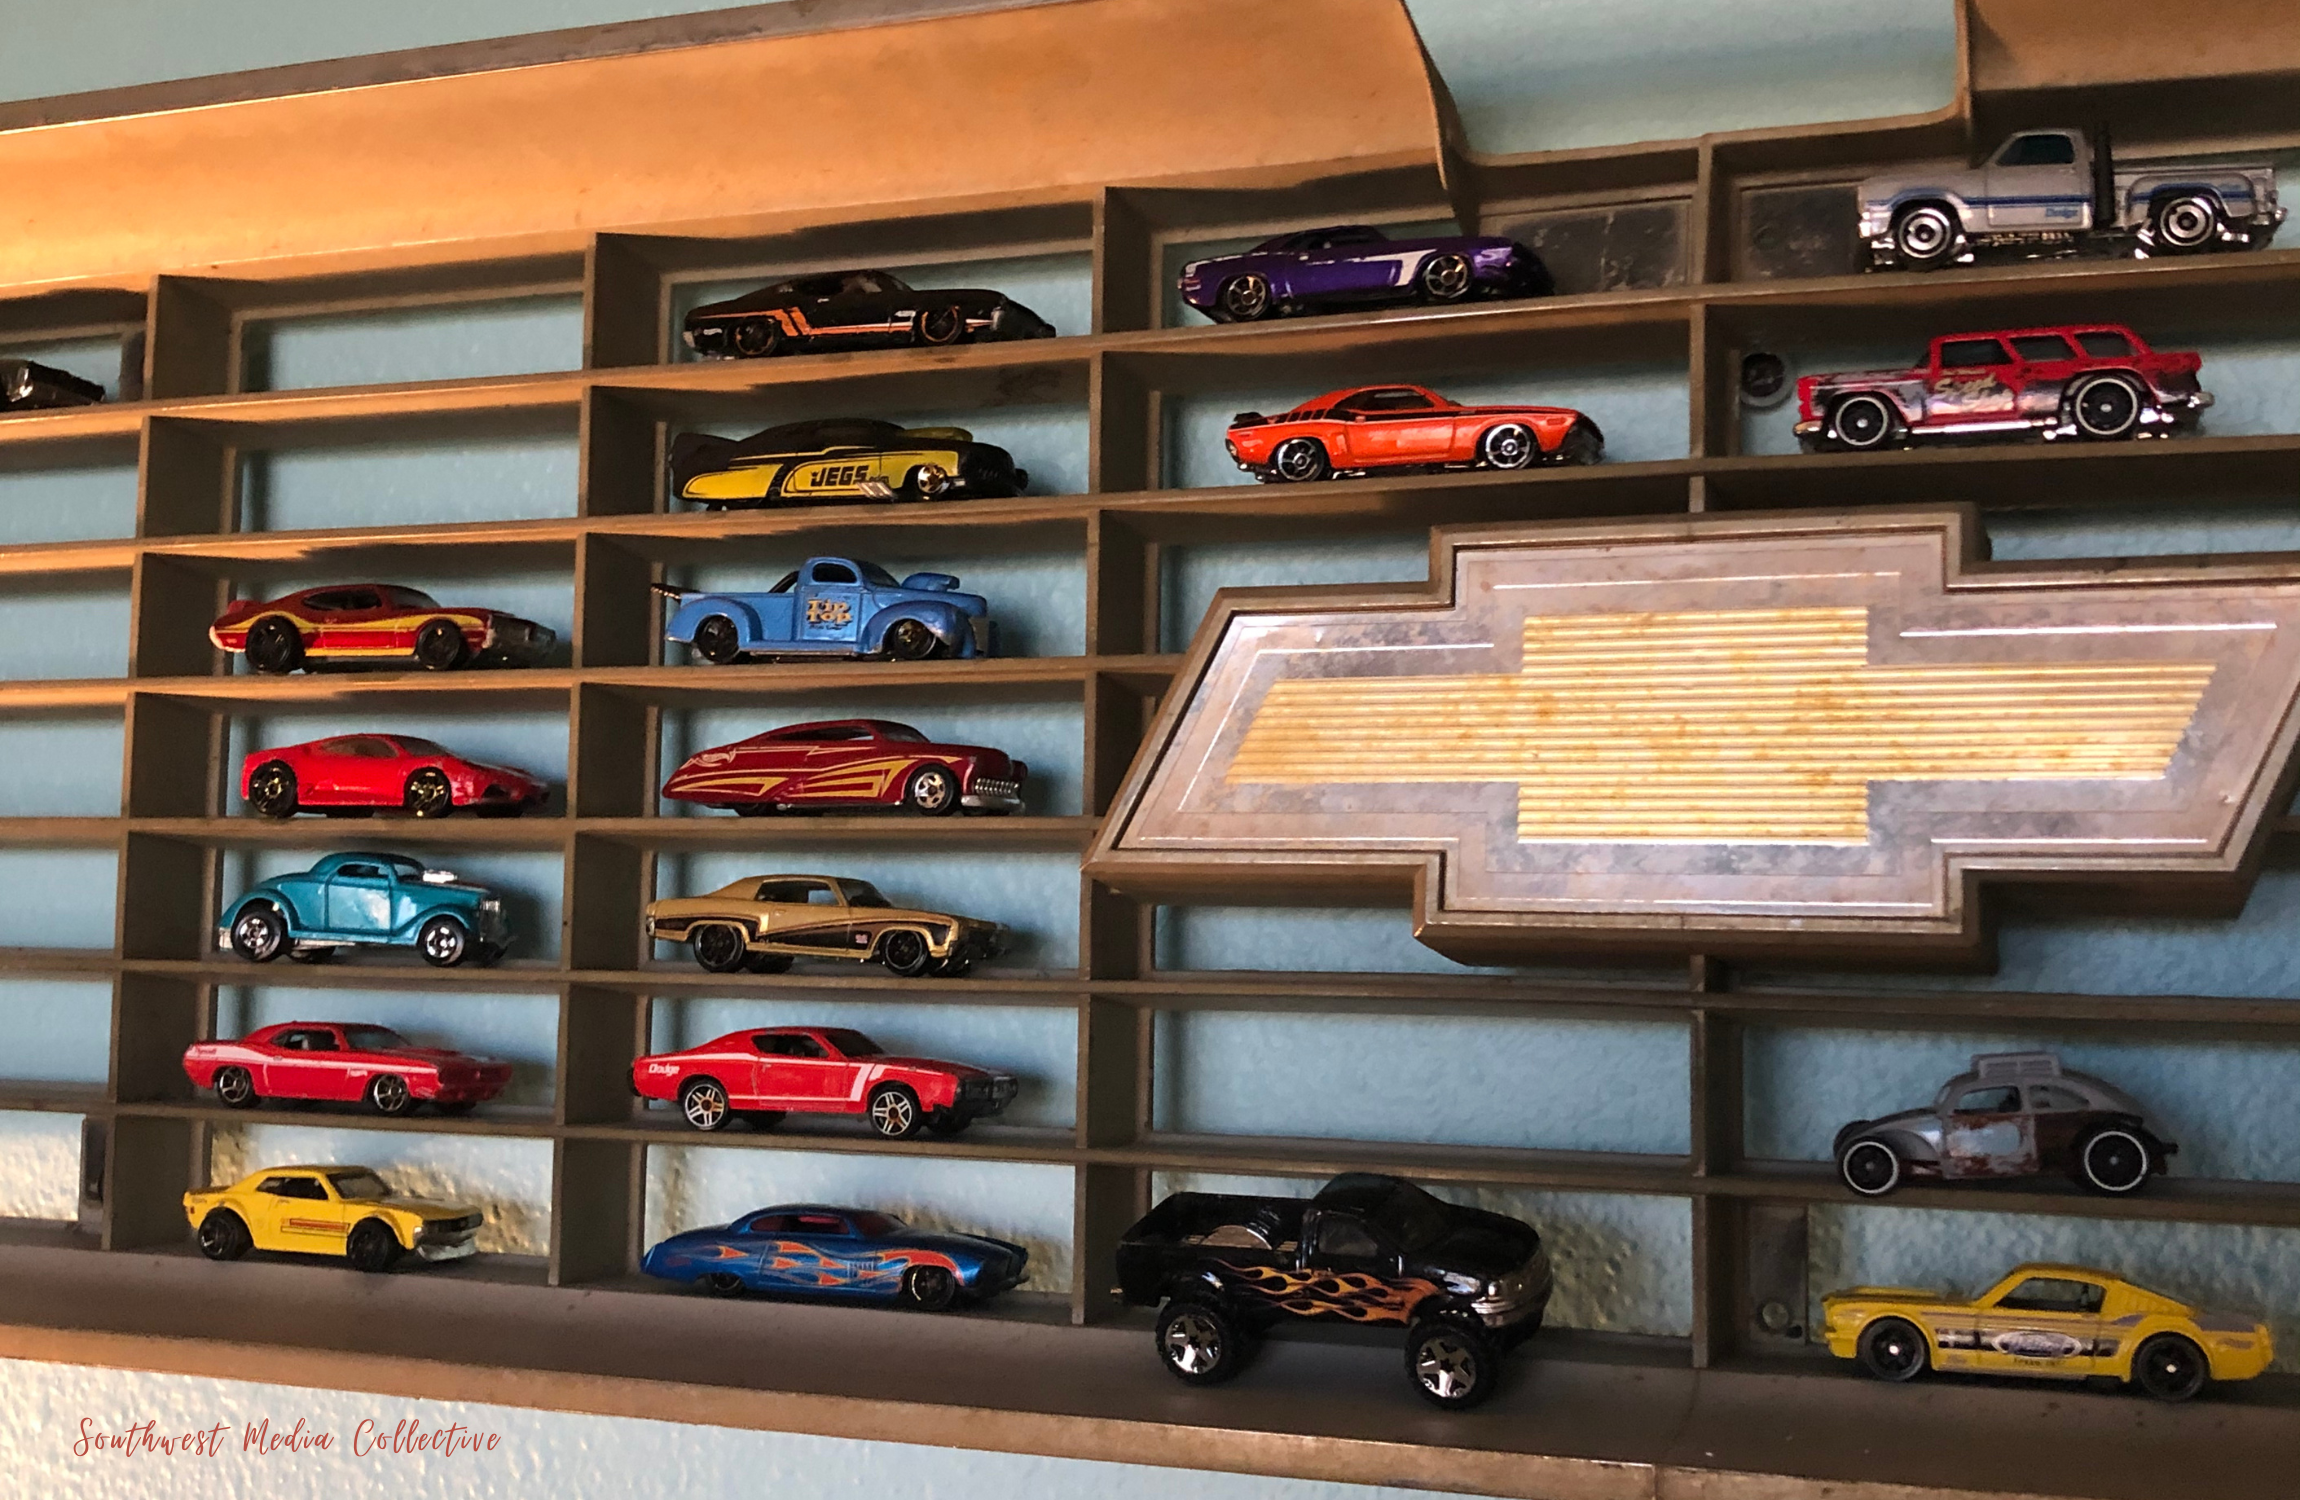 Have you priced a Hot Wheels Display lately? Look no further than an egg-crate grille from a 73-87 Chevy half-ton pickup. Use it to display your ever-growing Hot Wheels collection!